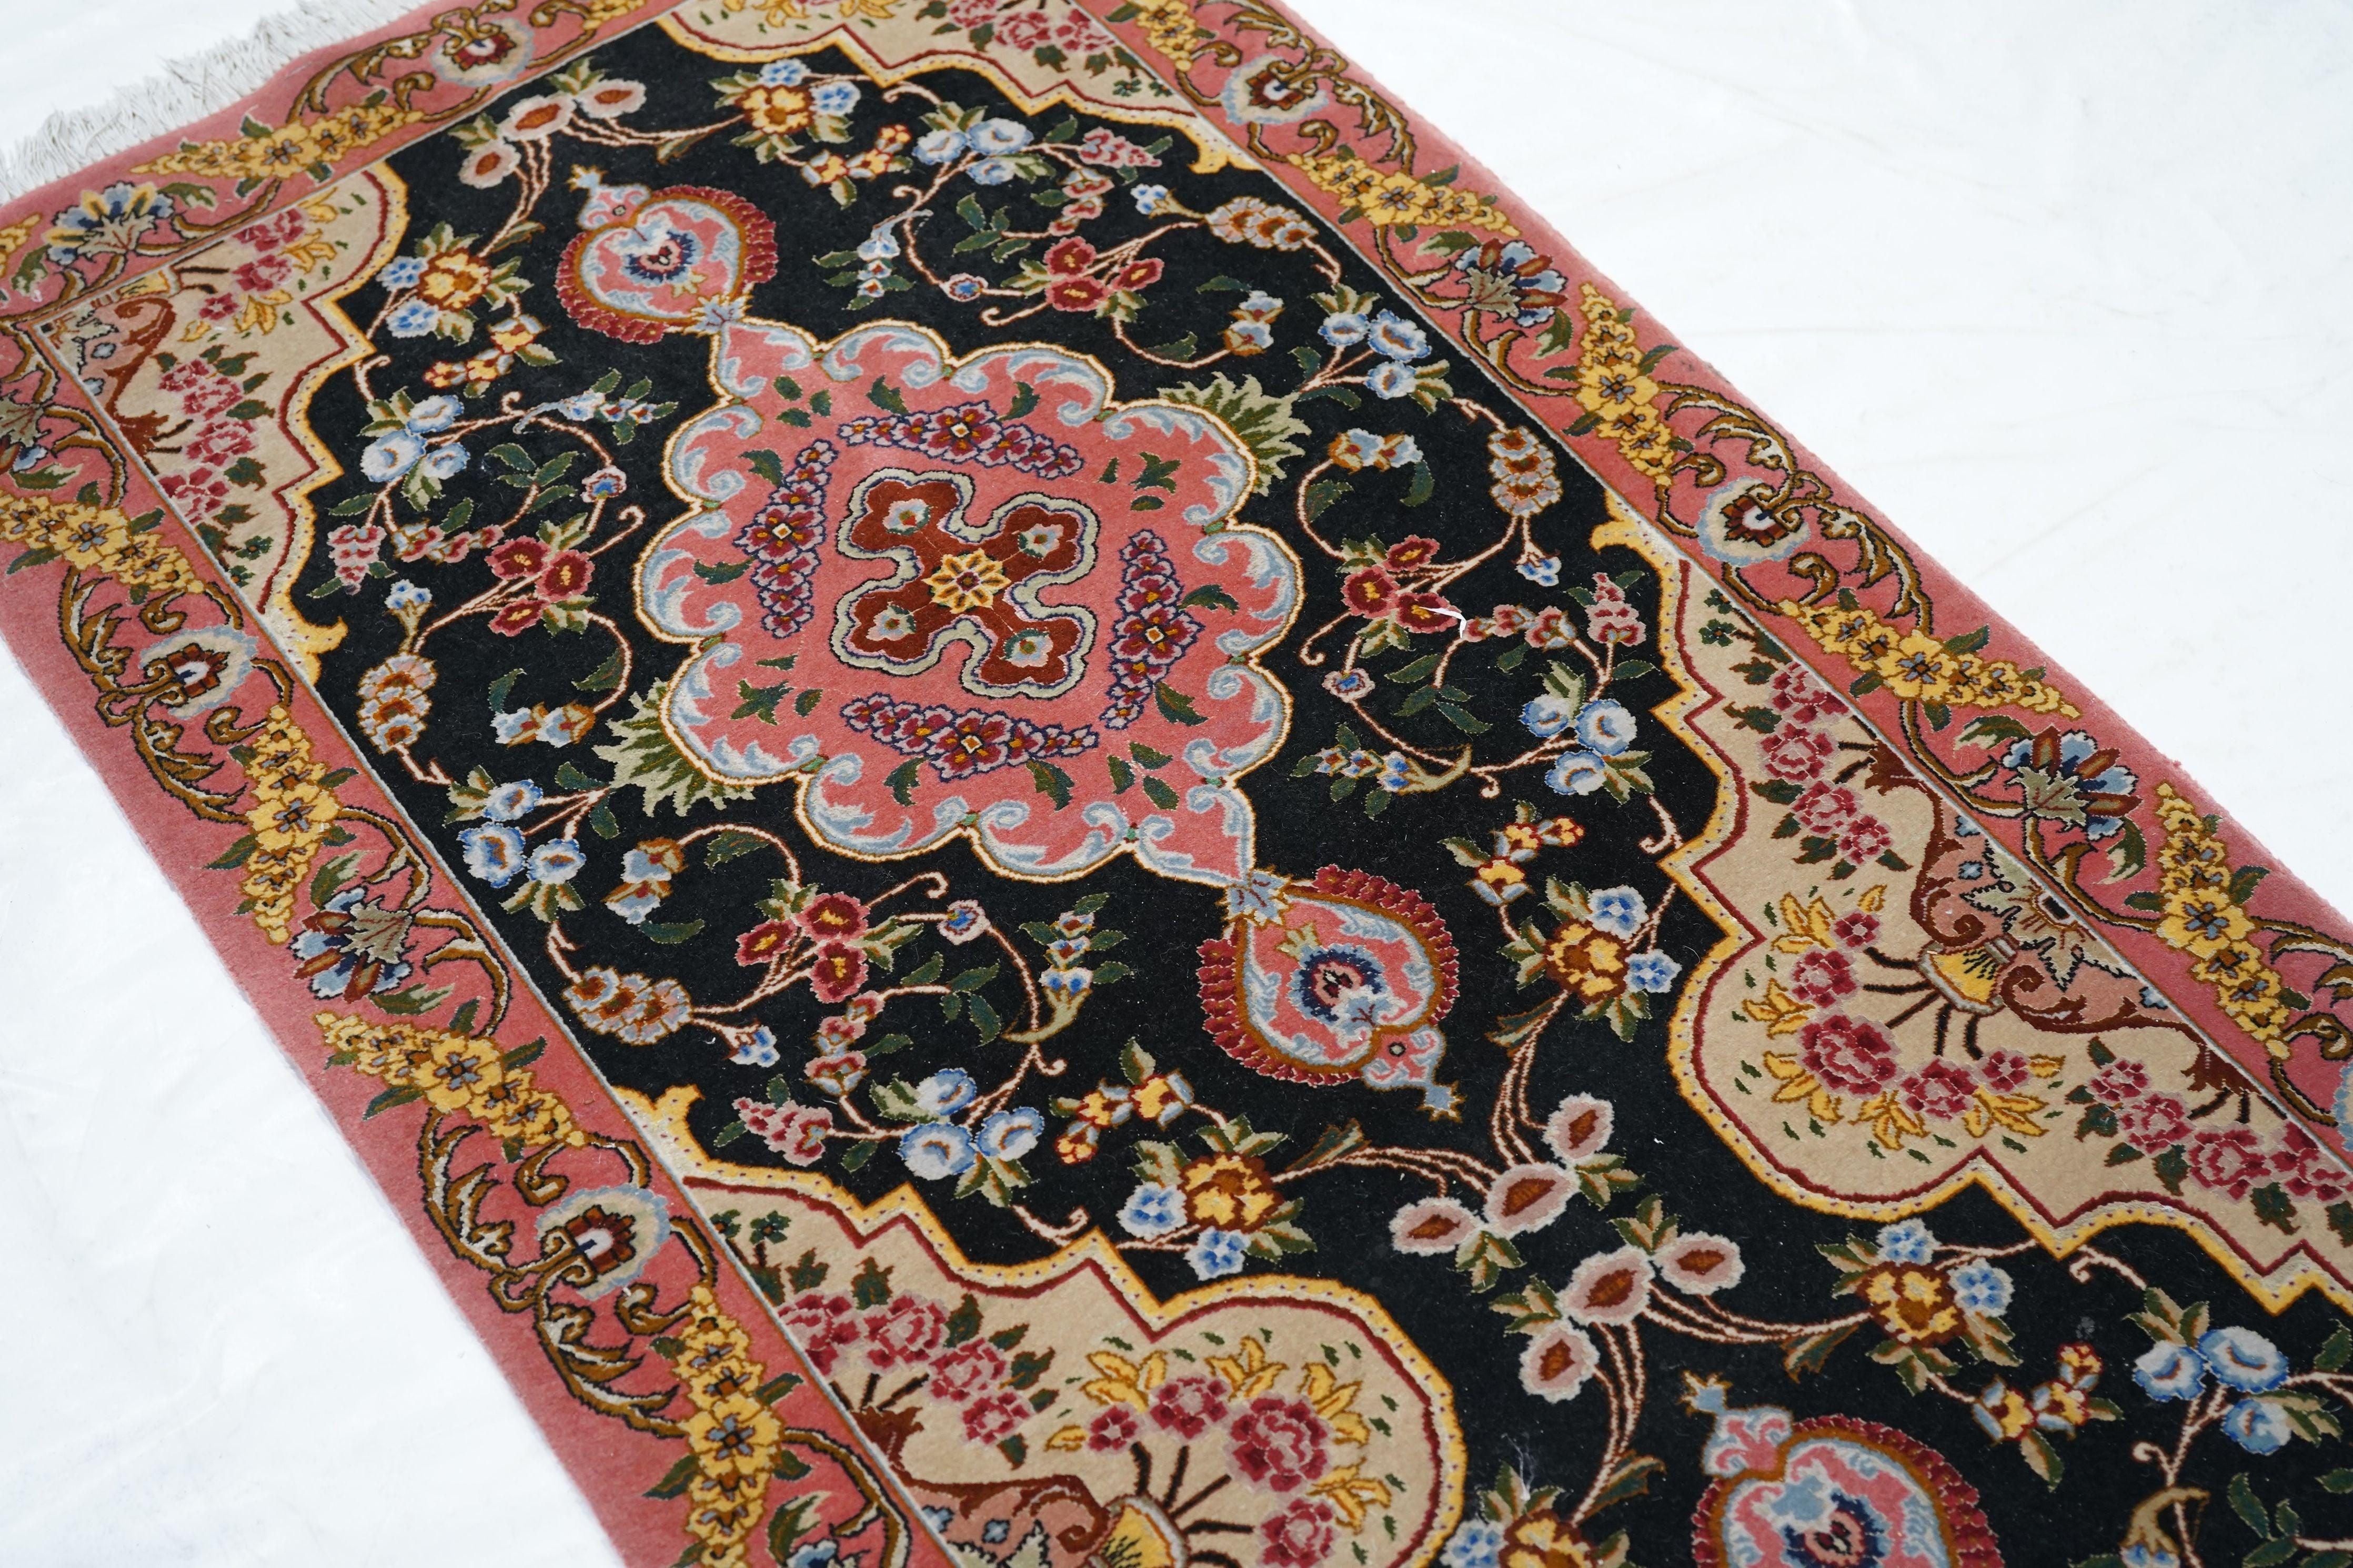 Extremely Fine Vintage Persian Tabriz Wool & Silk Runner 2'7'' x 10'3'' For Sale 2